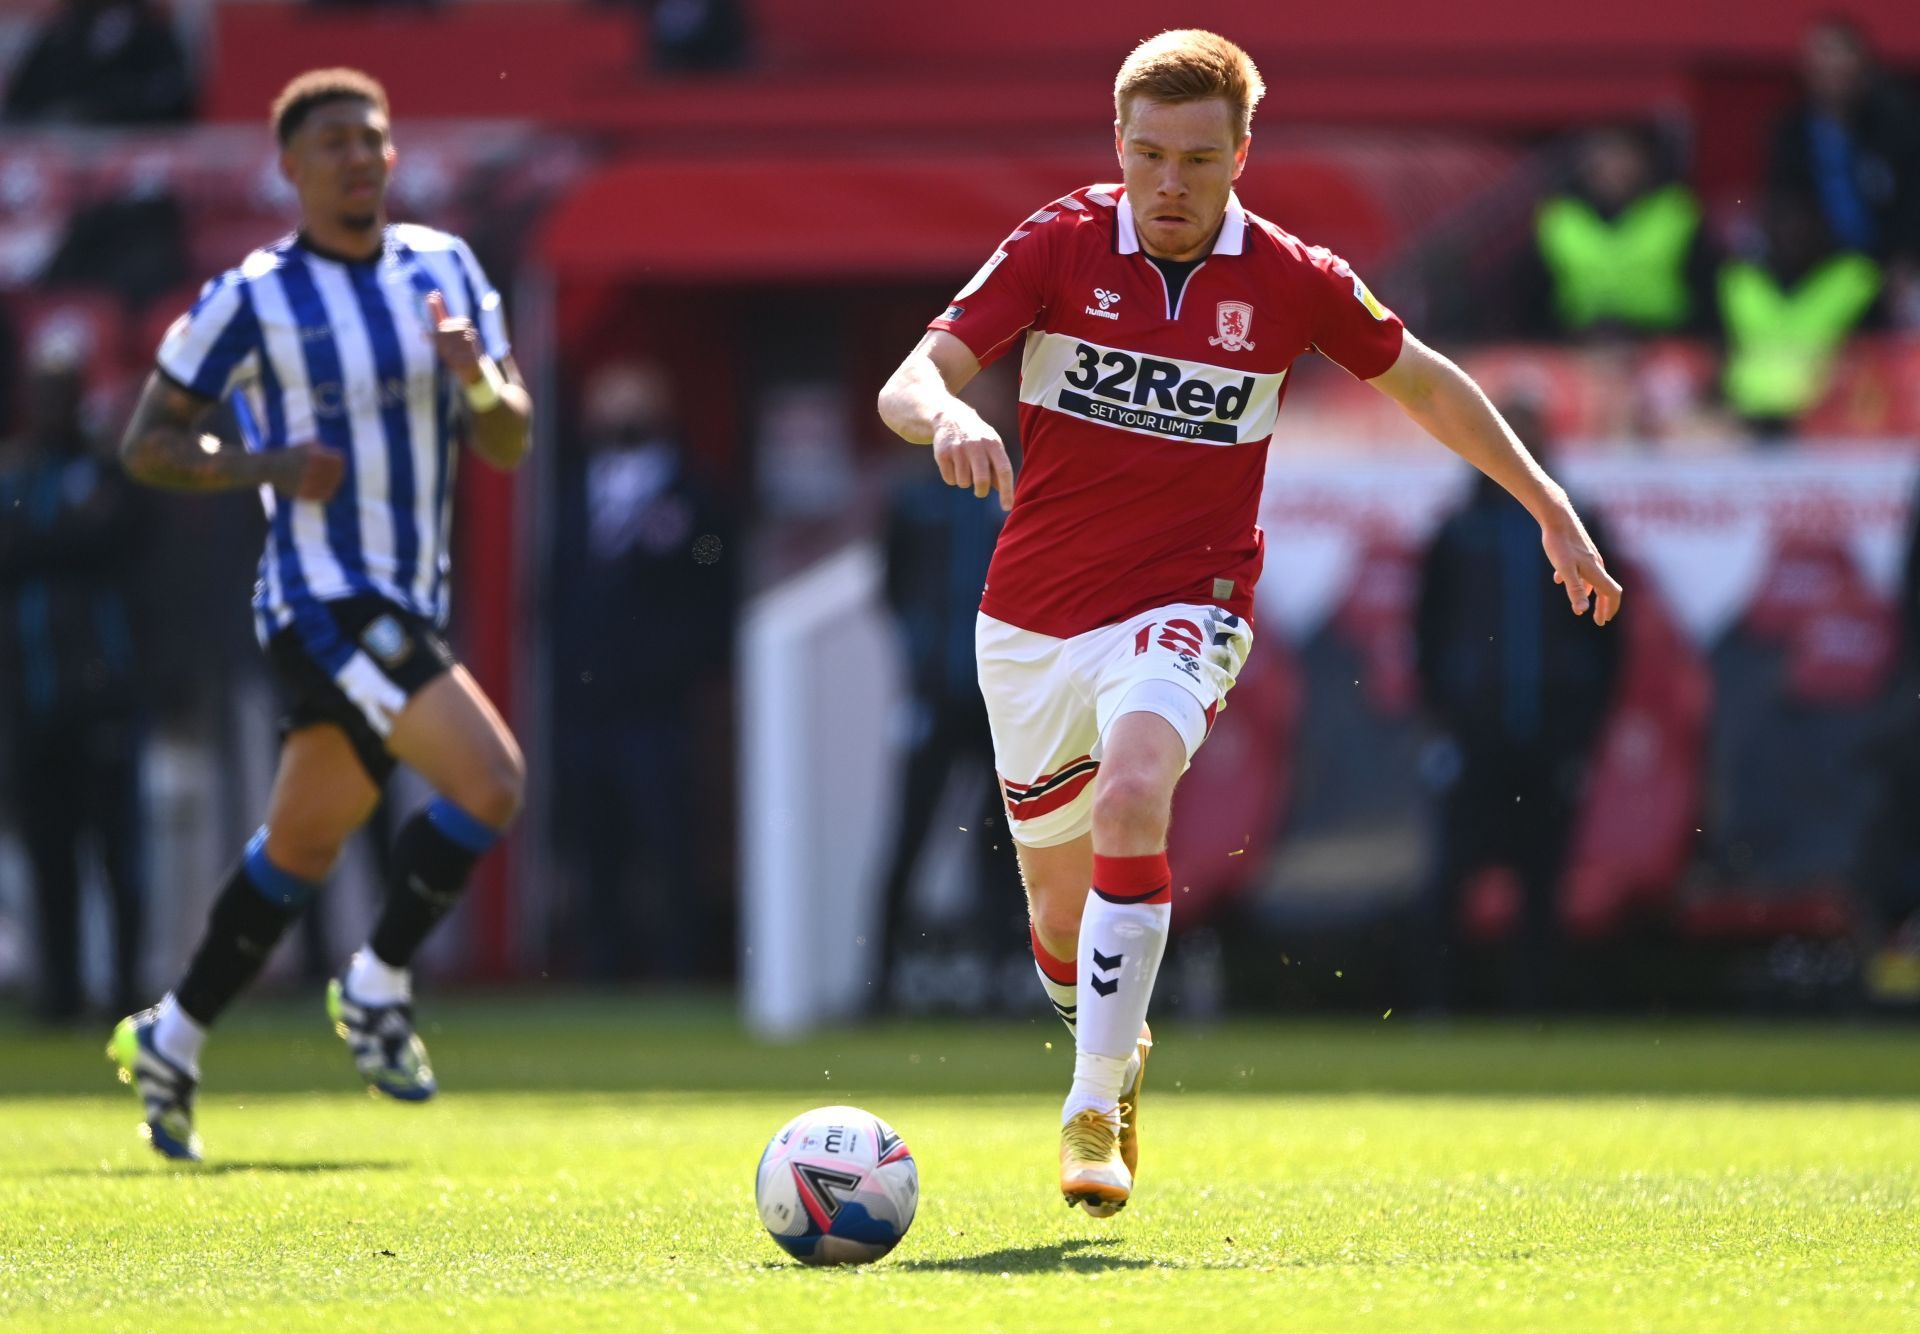 Watmore will be a huge miss for Middlesbrough